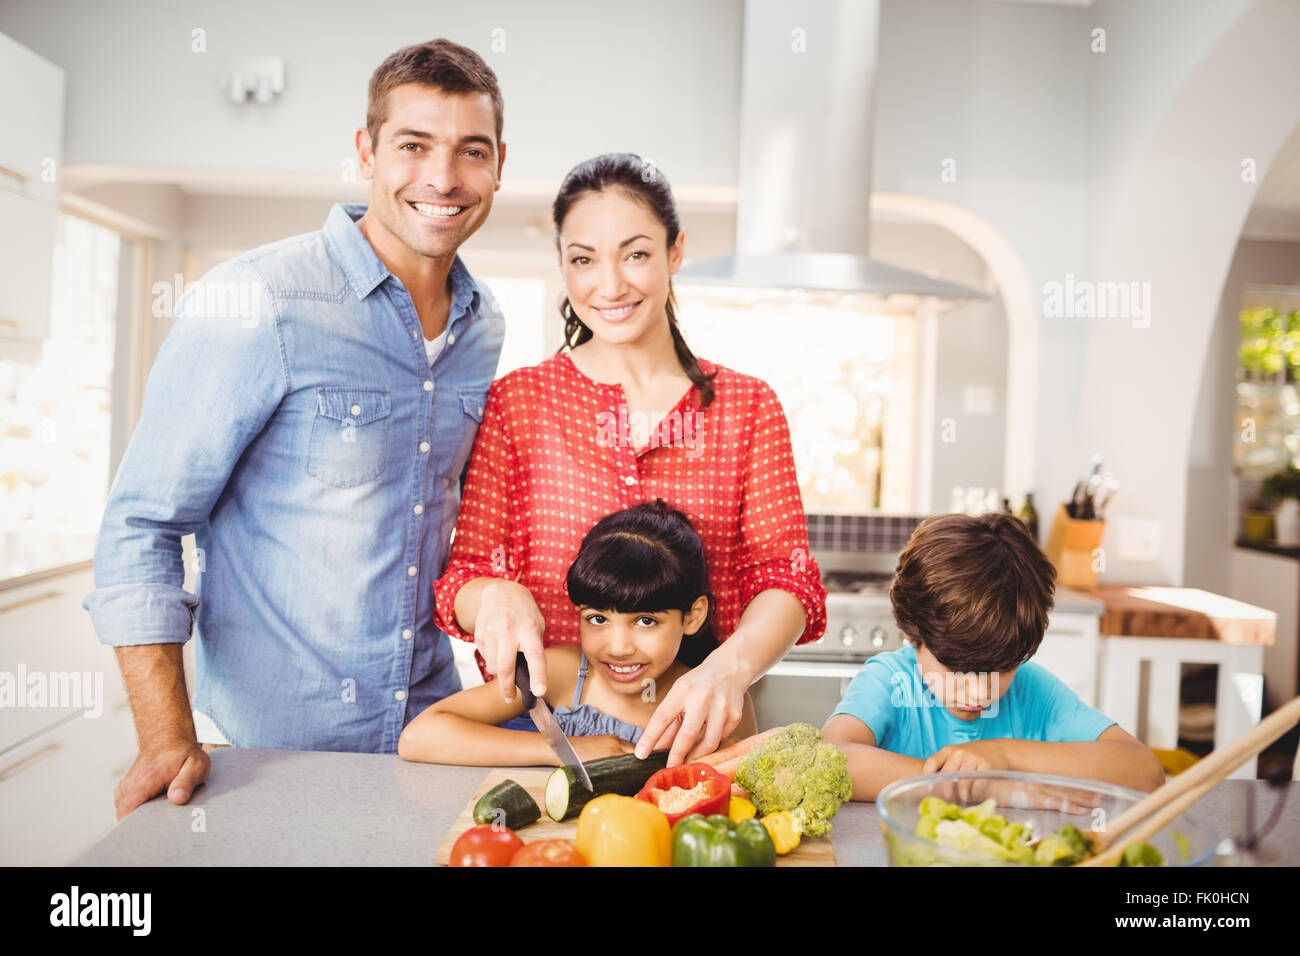 Happy woman preparing food with family Stock Photo